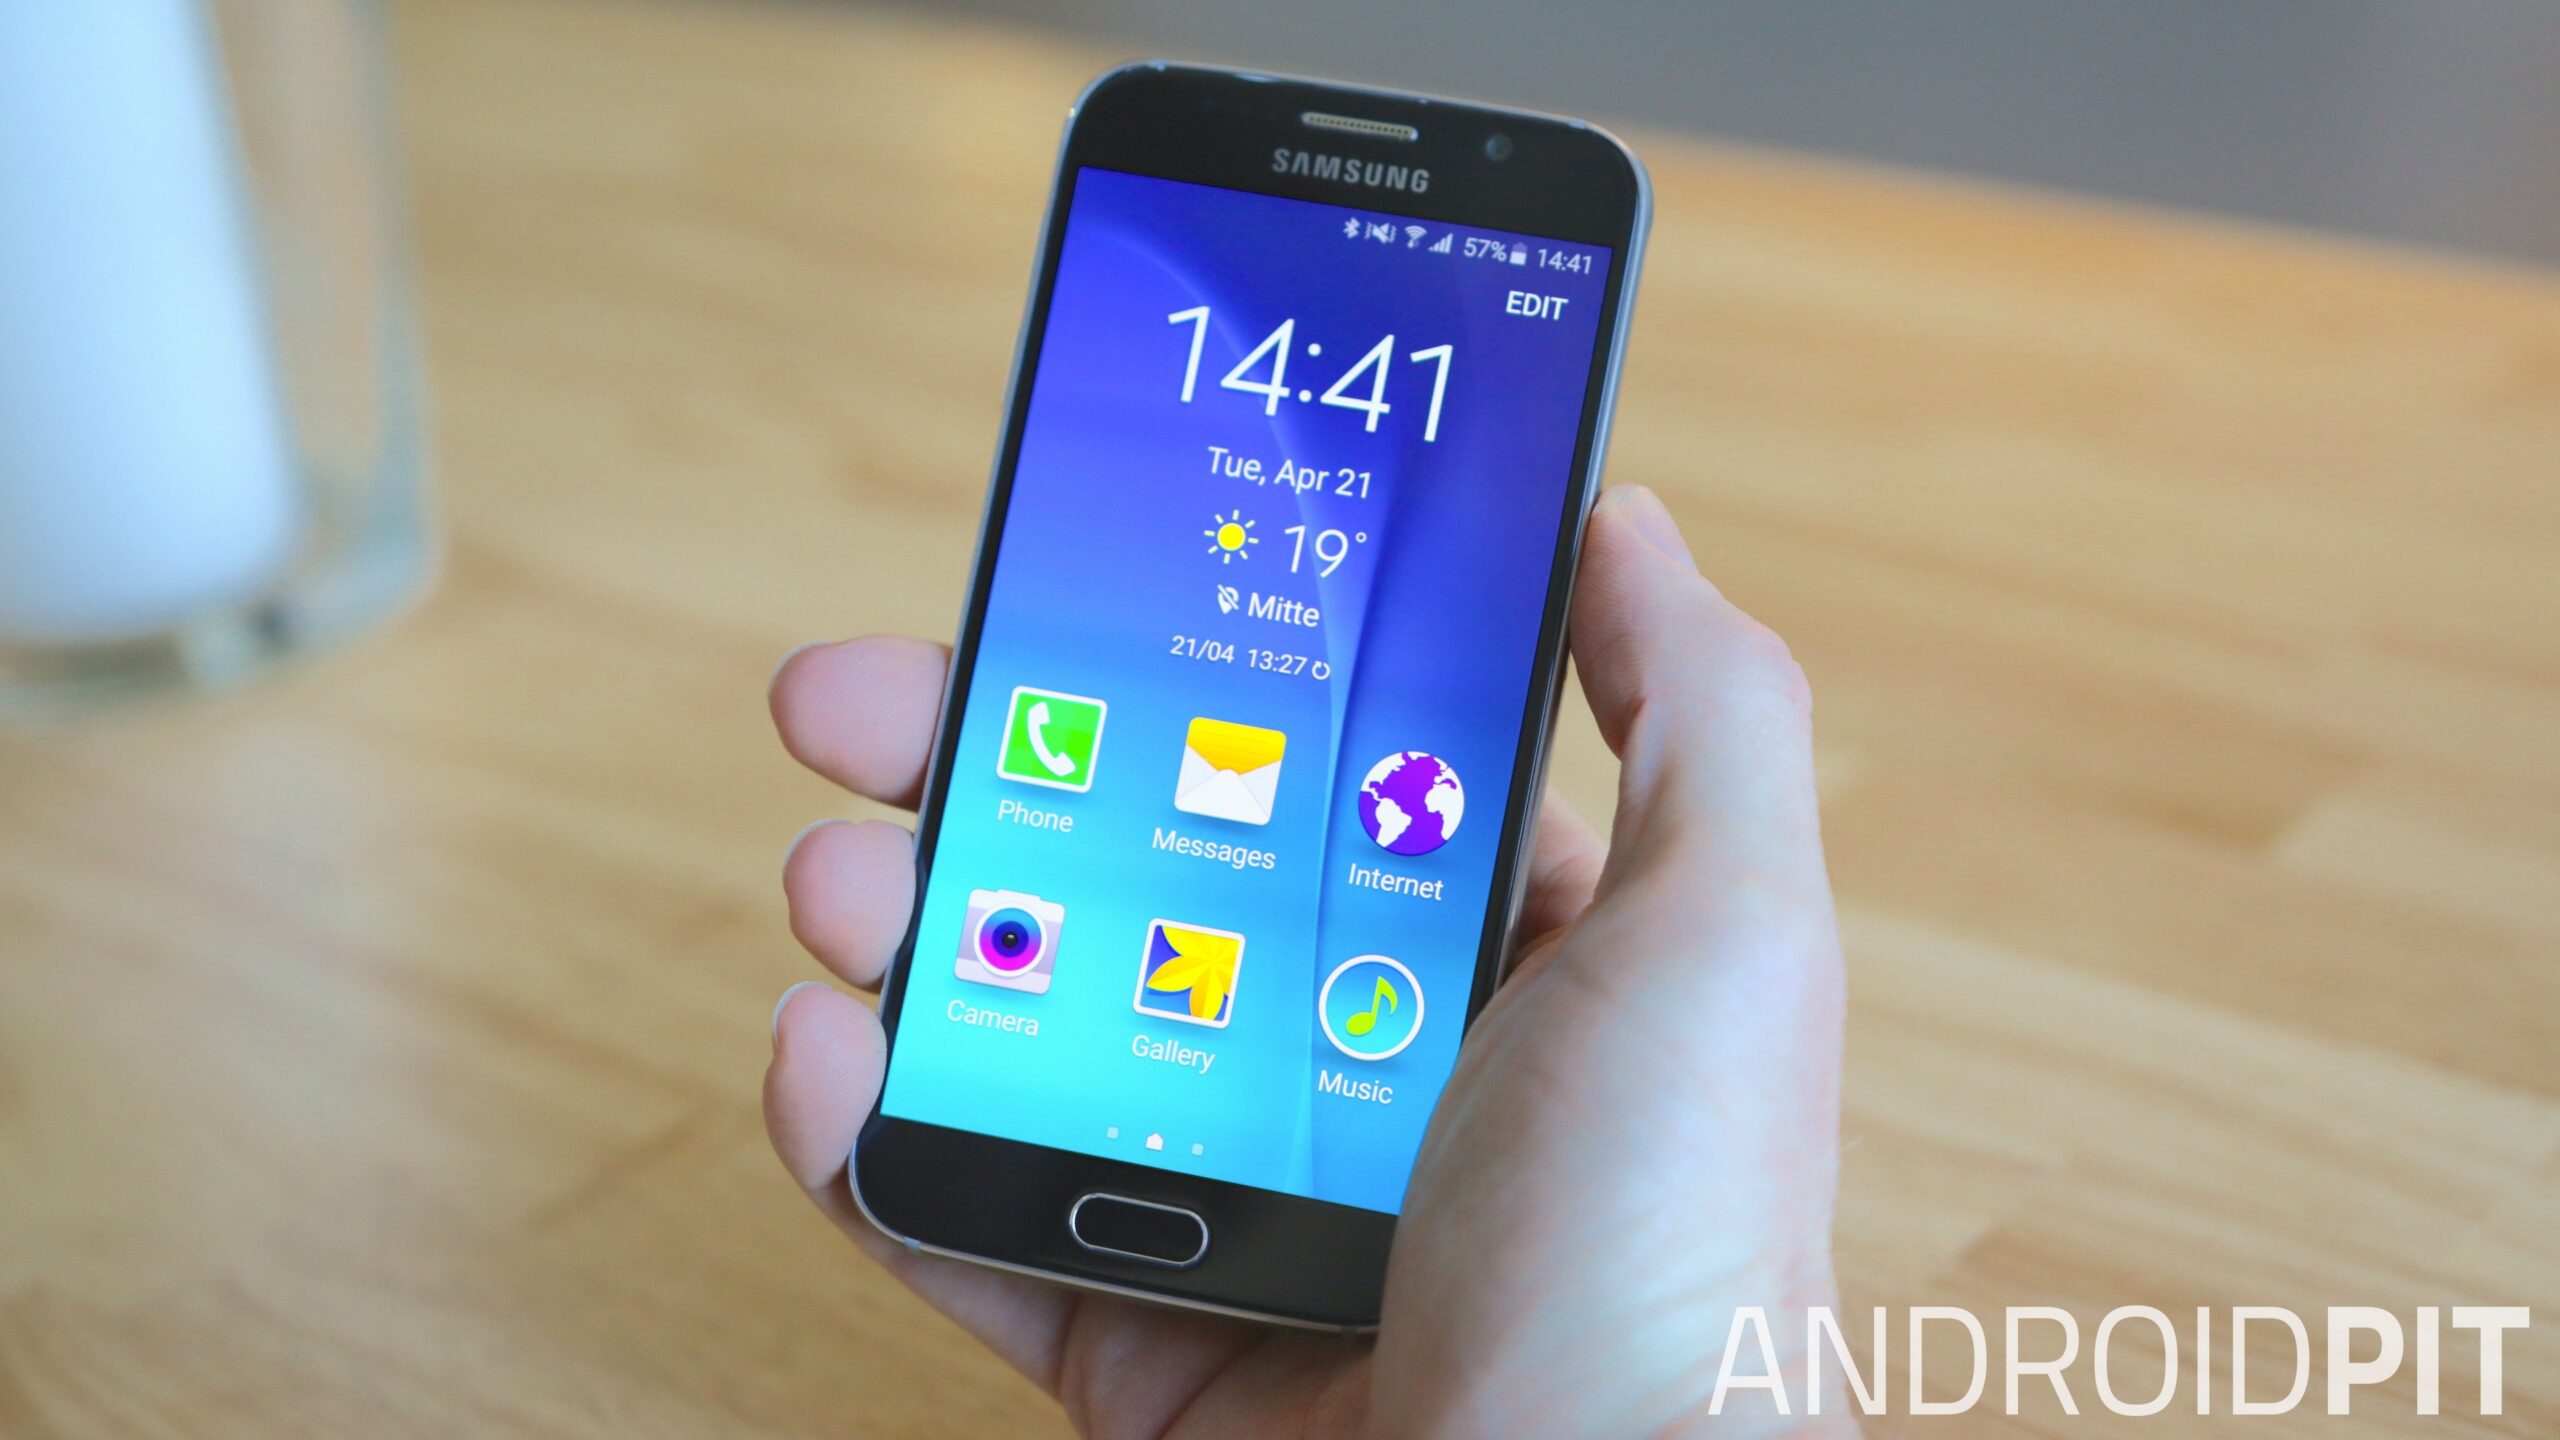 Check out 5 tricks to get the most out of your Samsung!